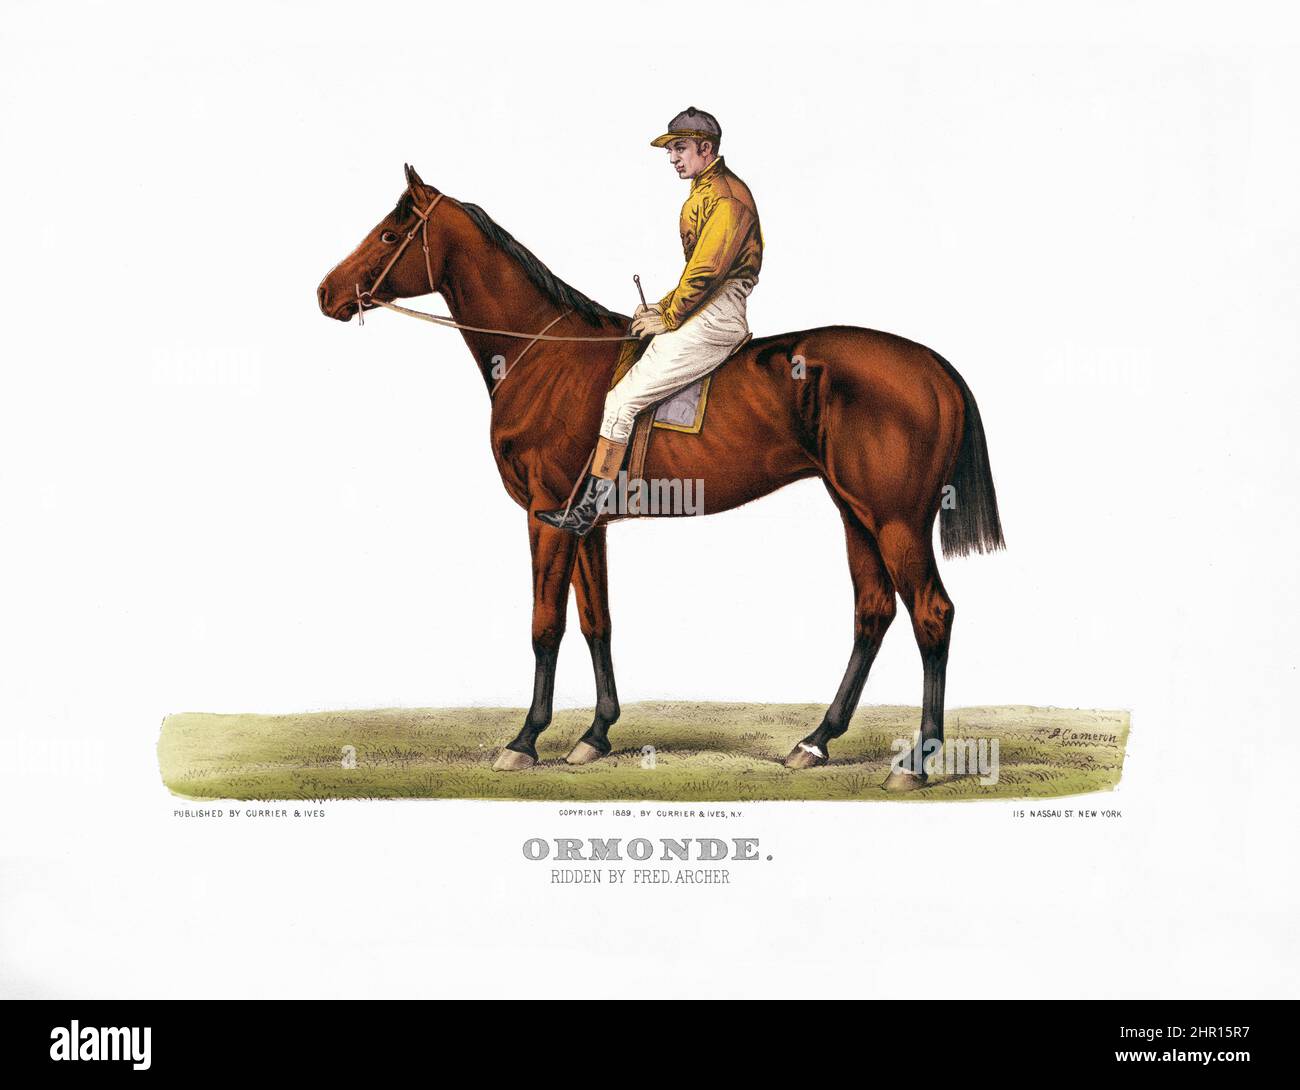 Ormonde: ridden by Fred Archer. Lithographs--Hand-colored 1889. Artwork by John Cameron. Published by Currier & Ives. Stock Photo